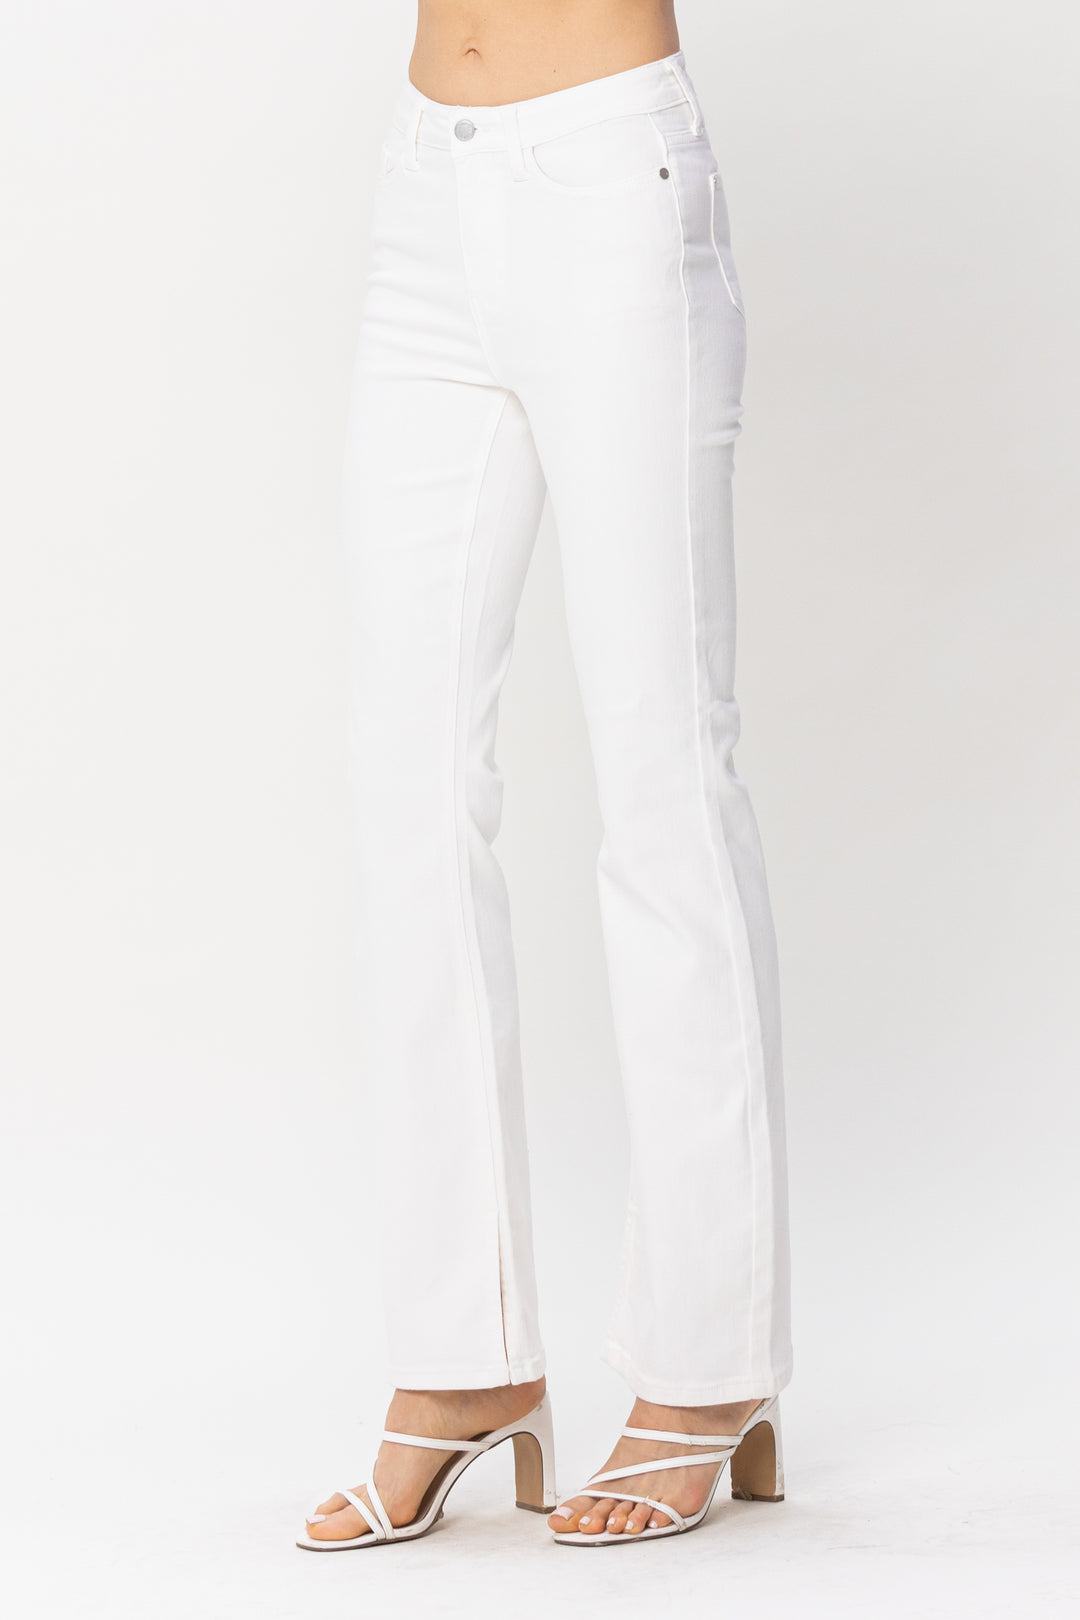 Ladie Judy Blue Midrise Bootcut in Pure White with Hem Slit - 88643REG